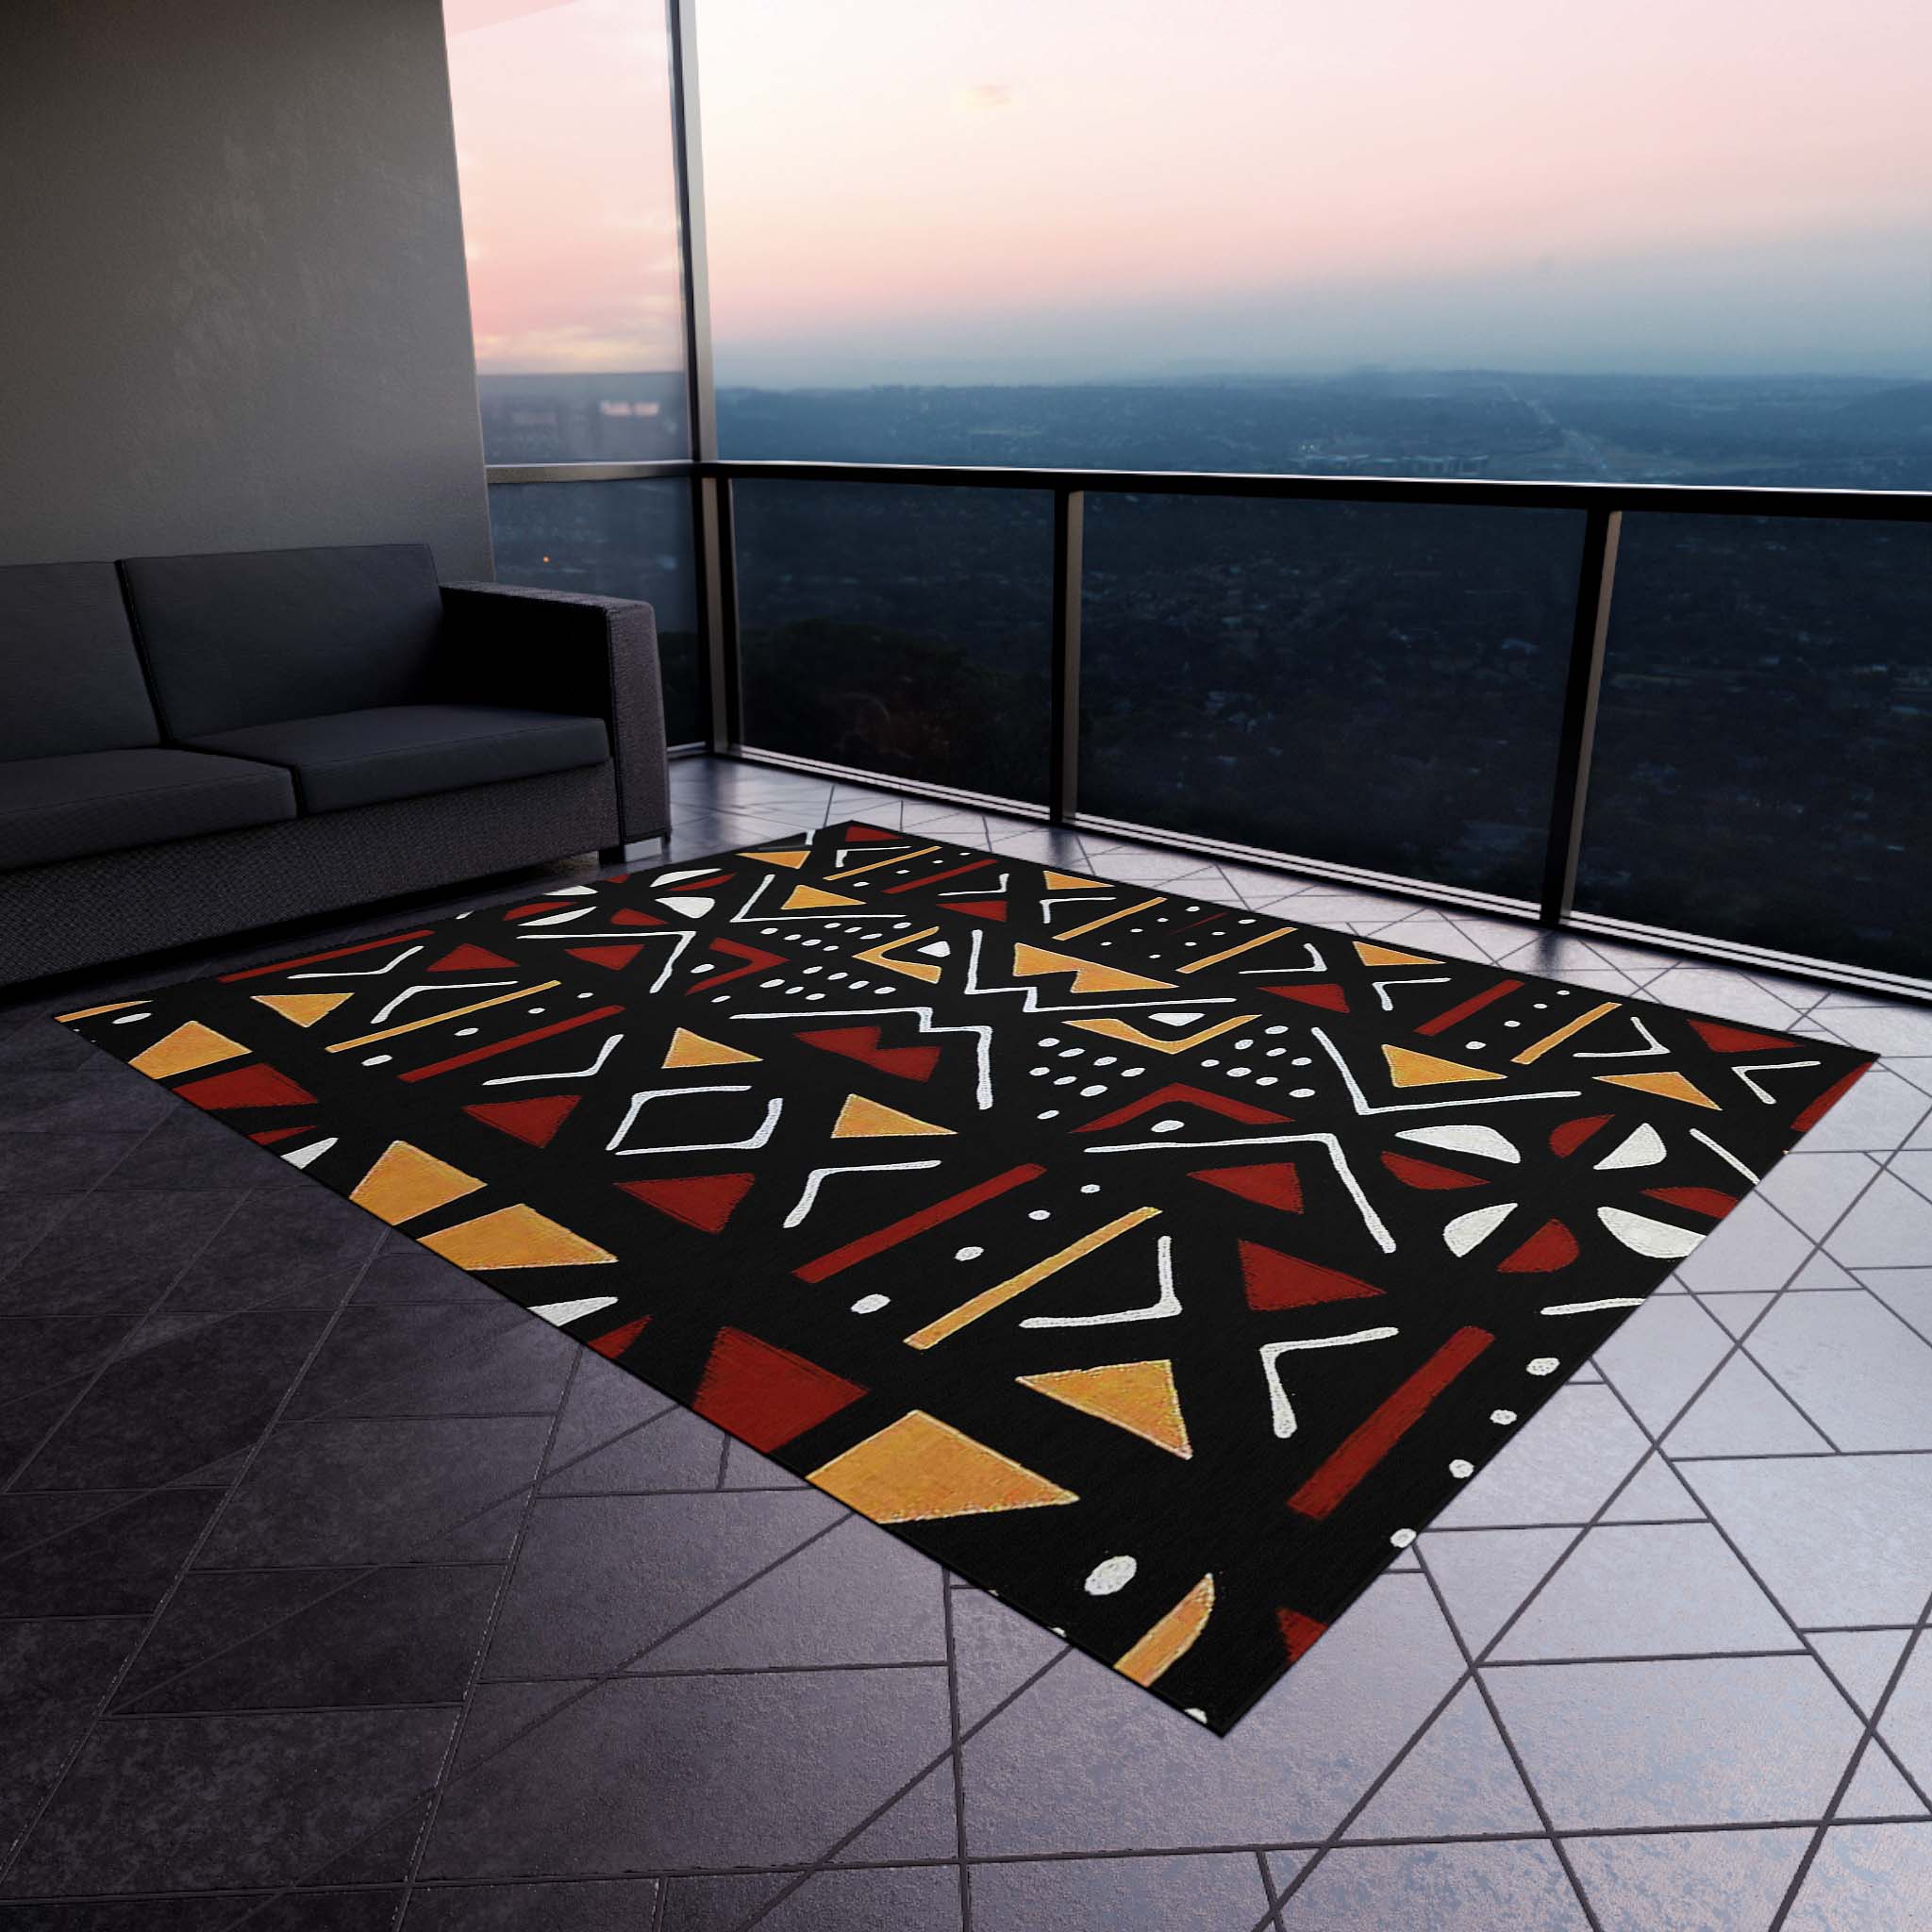 Outdoor African Area Rug Mudcloth Patterned Carpet - Bynelo